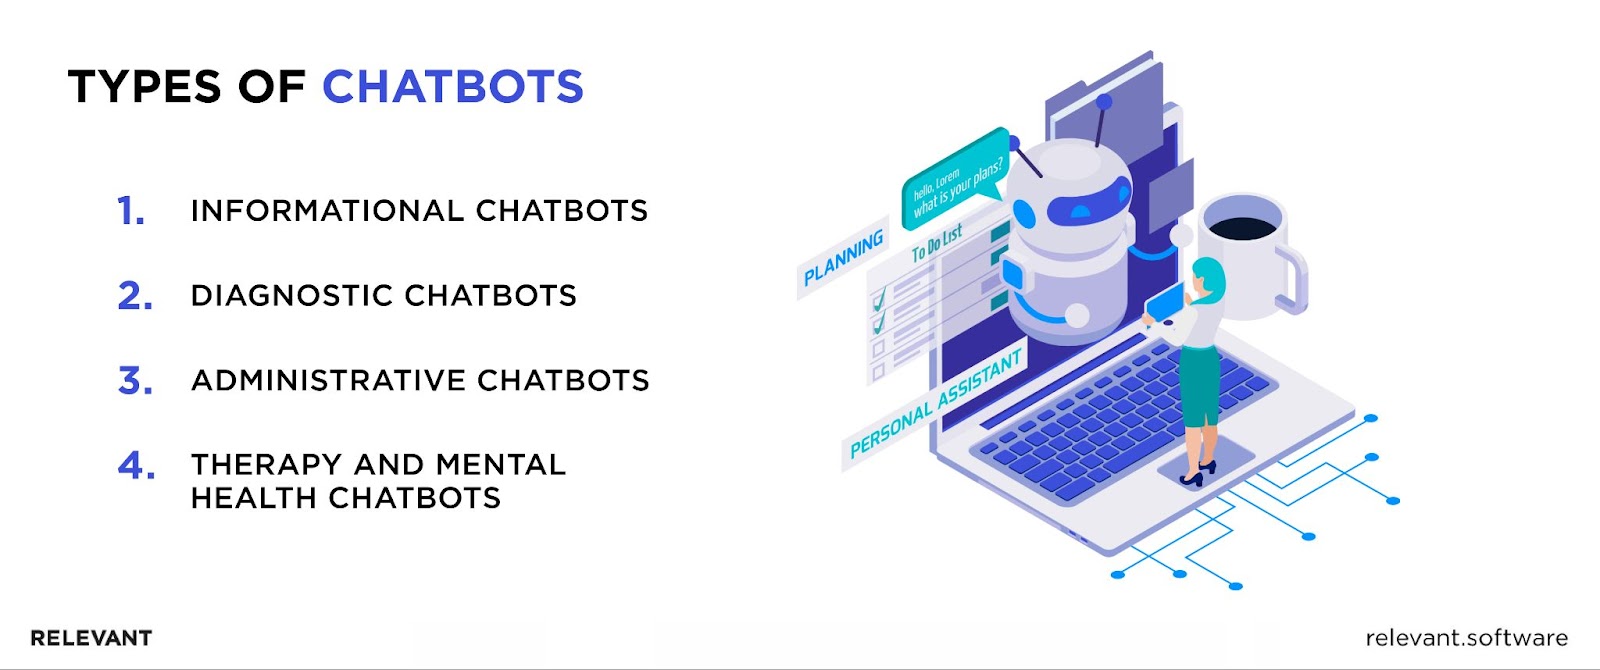 Types of chatbots in healthcare